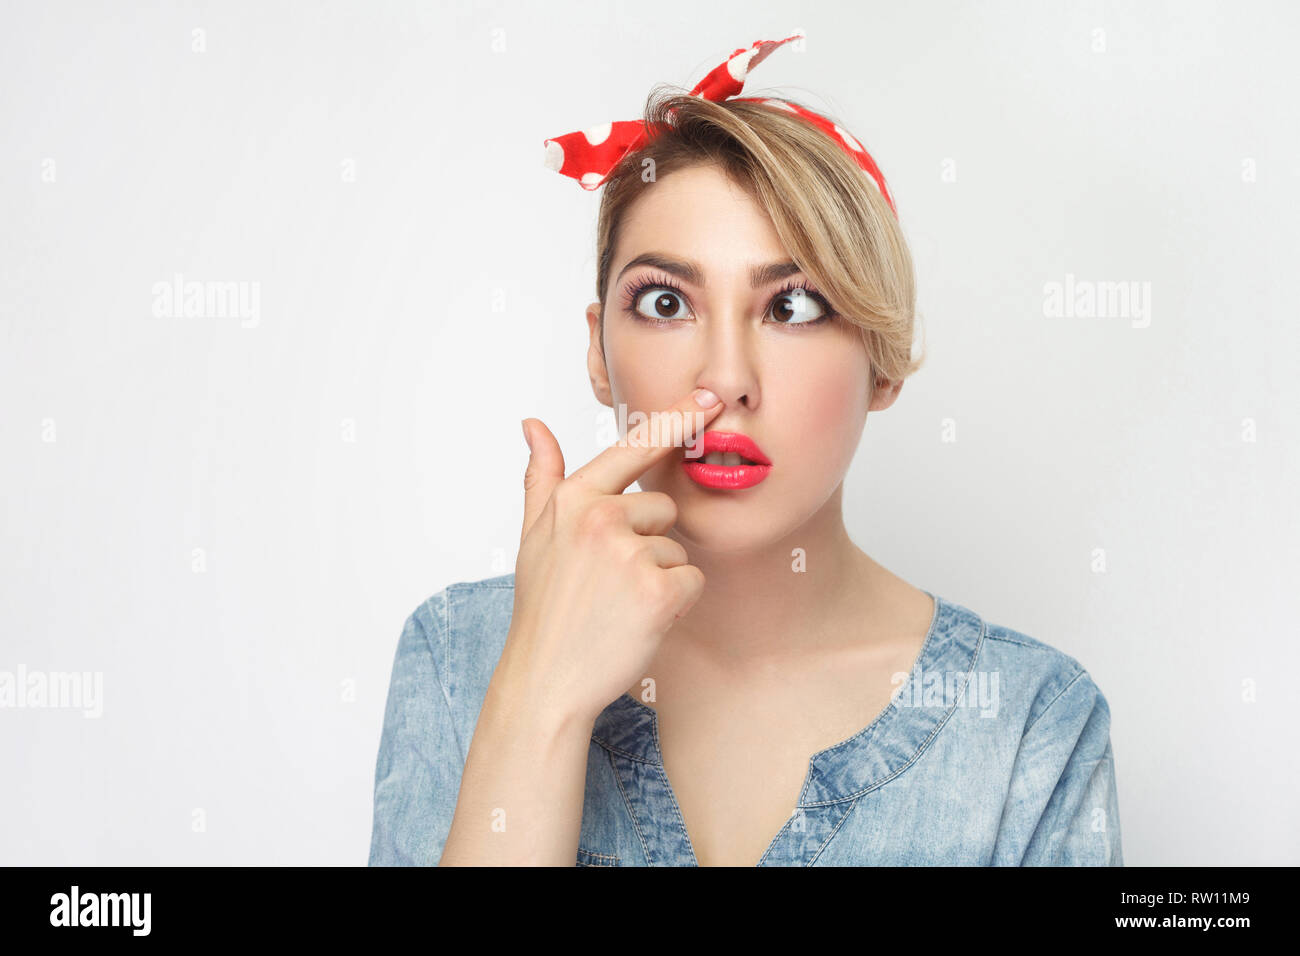 Closeup portrait of funny crazy crossed eyes young woman in casual blue denim shirt with makeup and red headband standing looking and picking her nose Stock Photo